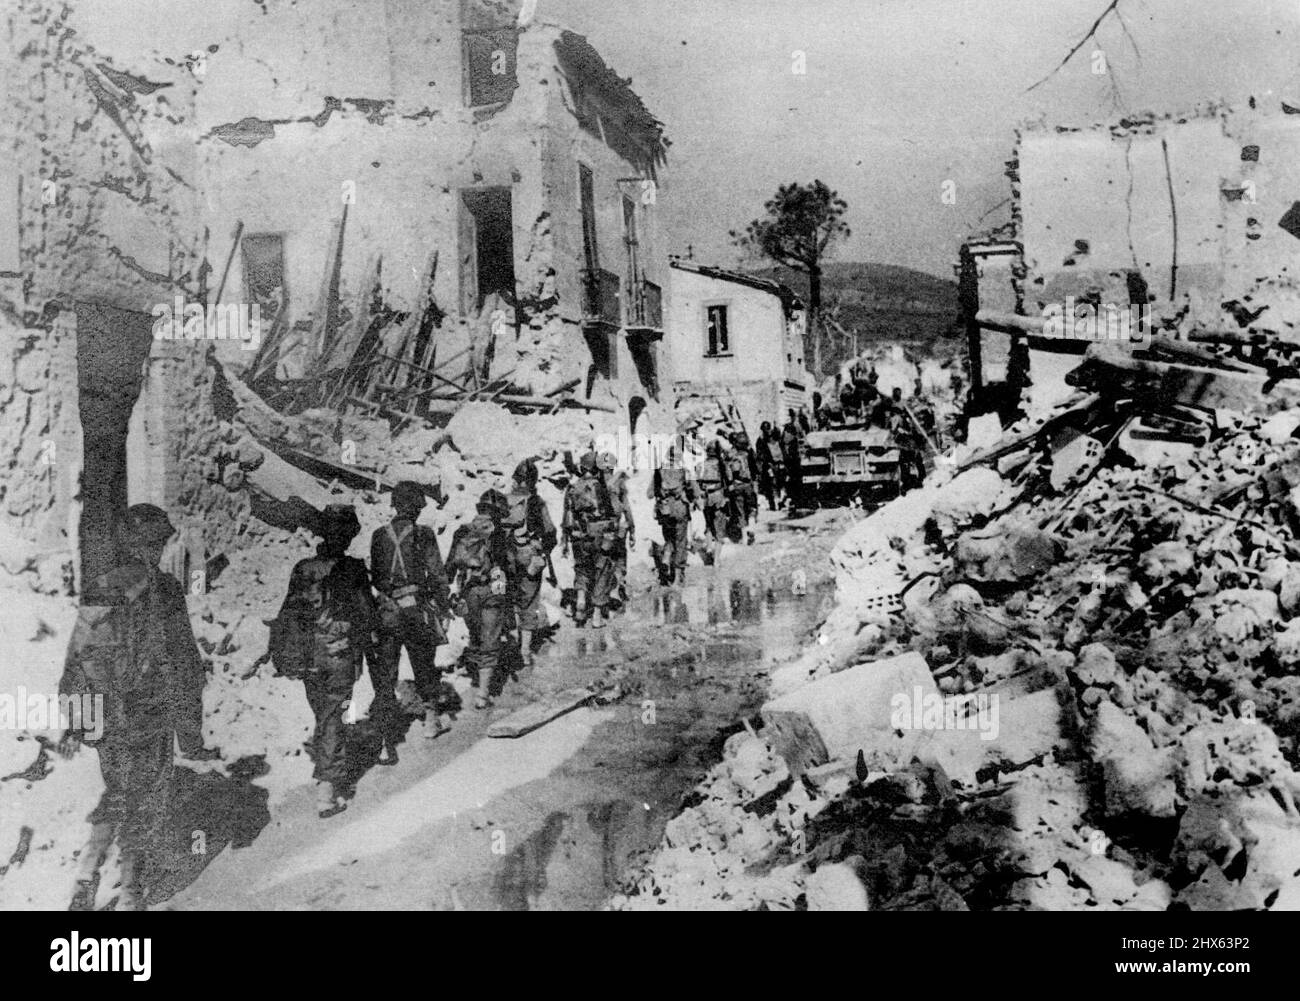 American Infantrymen file through the streets of Battipaglia, Italy after driving out the Germans. October 6, 1943. (Photo by Topical Press). Stock Photo